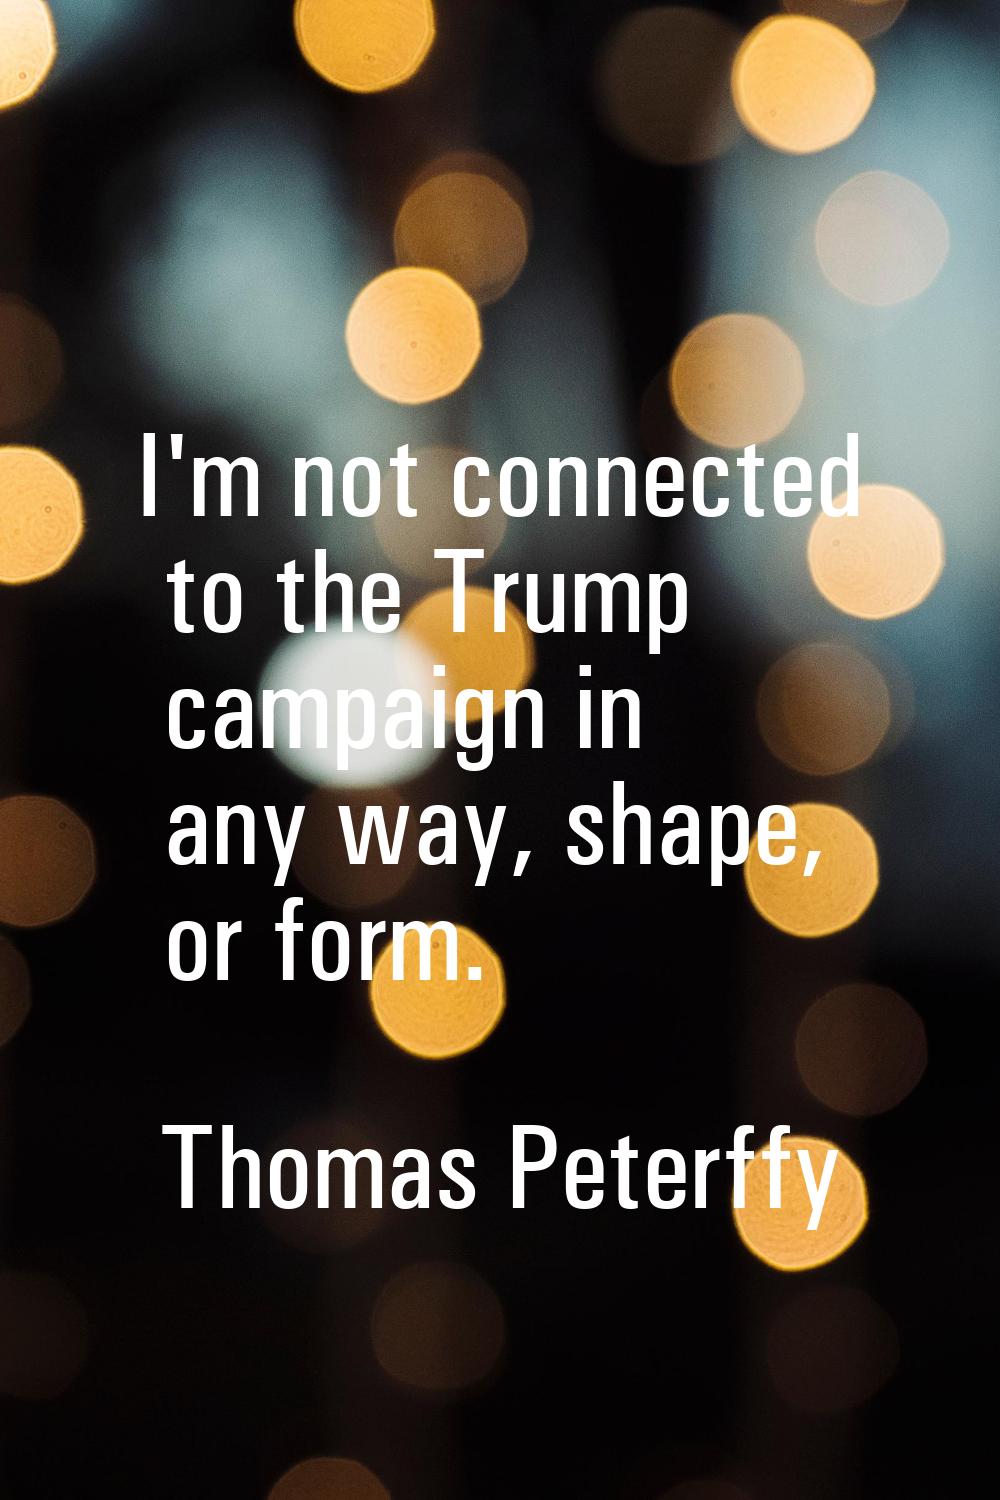 I'm not connected to the Trump campaign in any way, shape, or form.